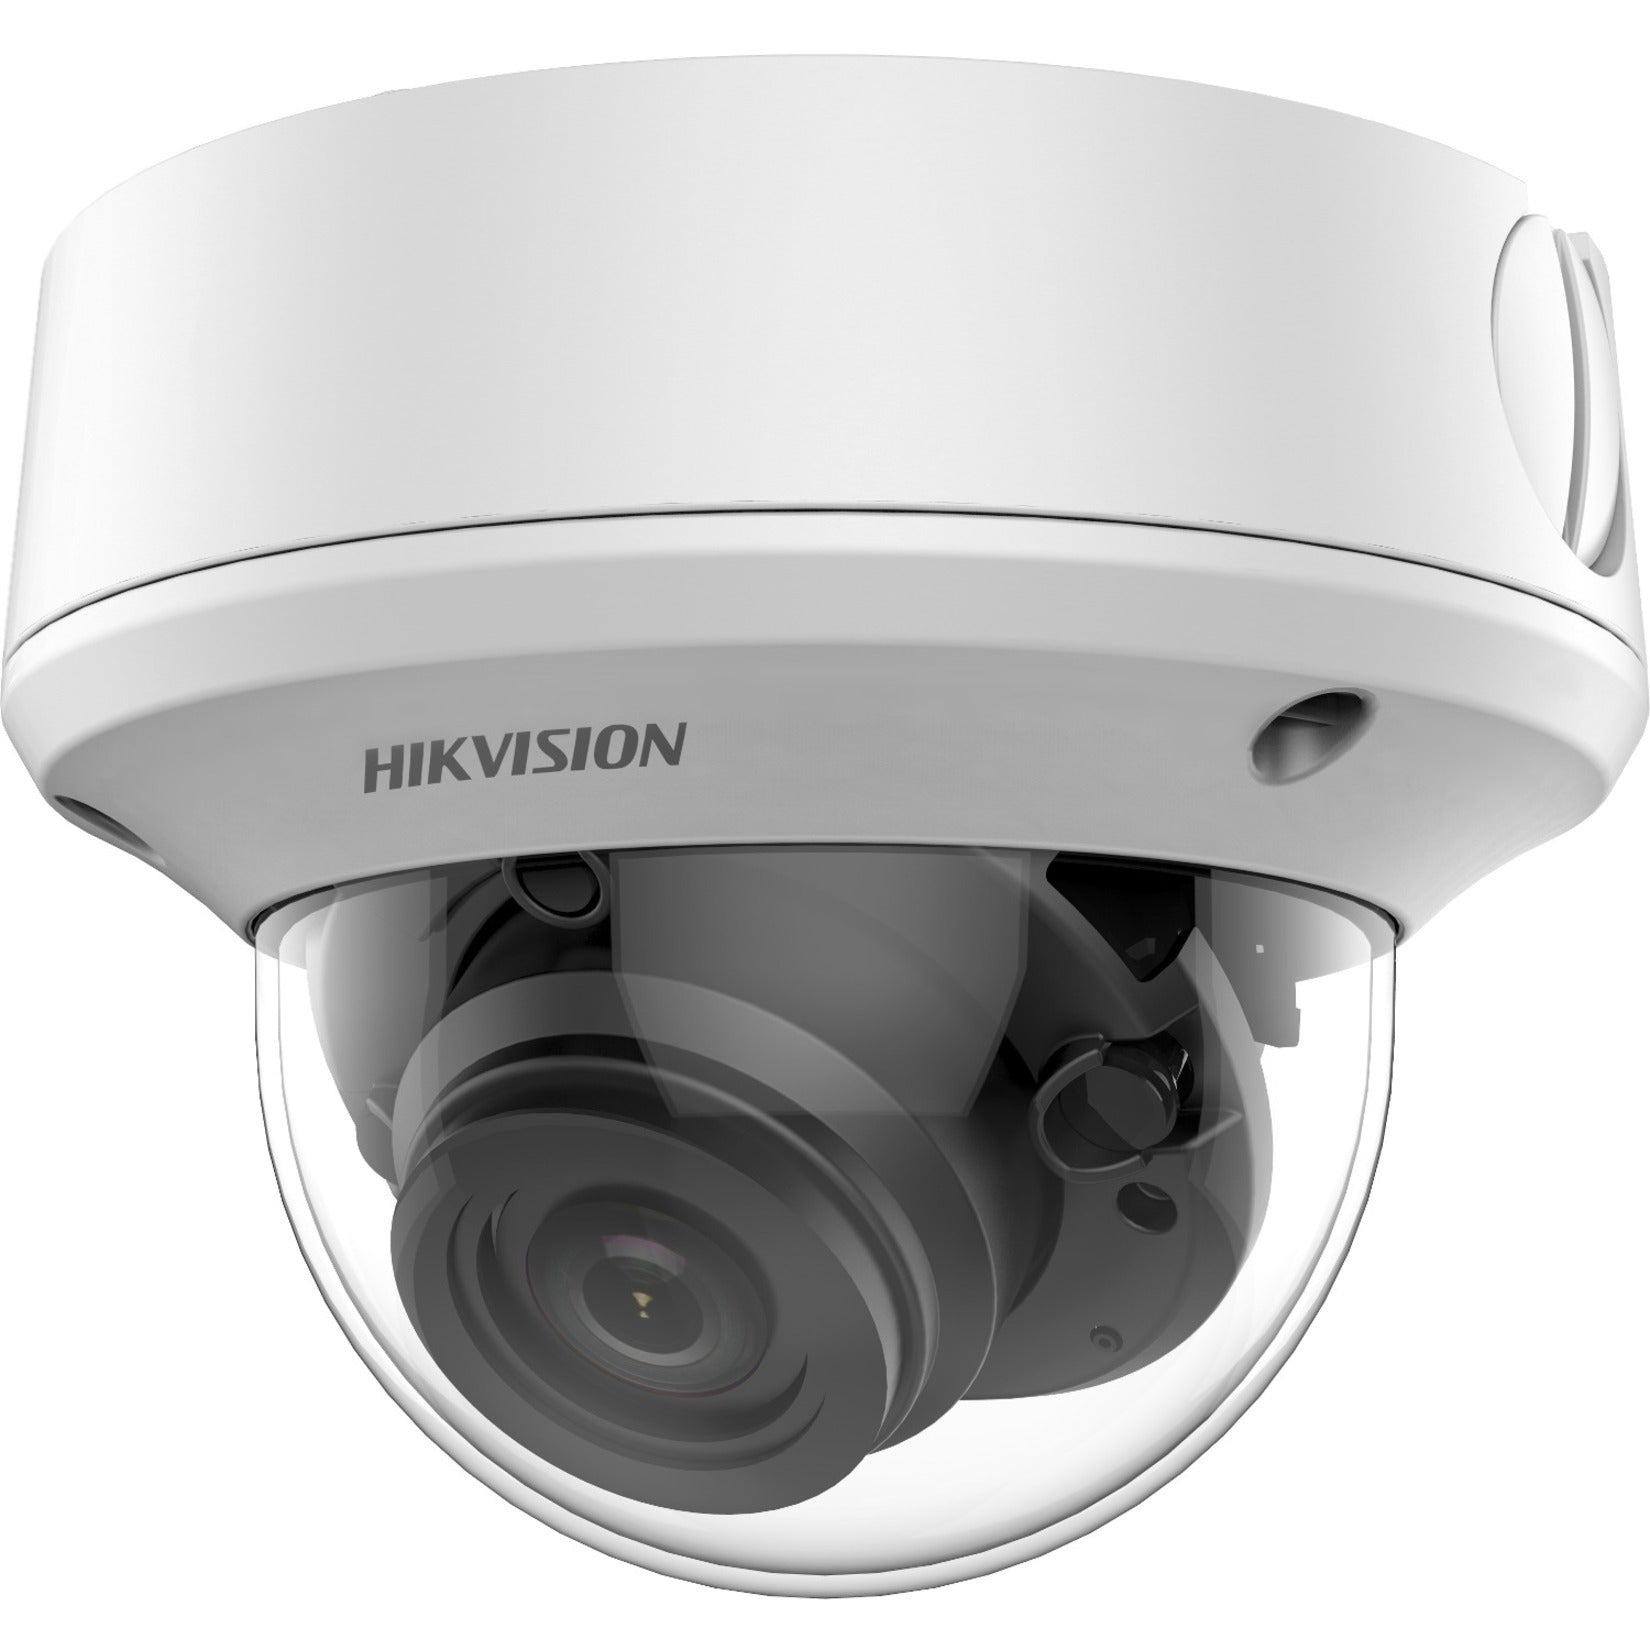 Hikvision DS-2CE5AD3T-AVPIT3ZF 2 MP Outdoor Ultra-Low Light Dome Camera Varifocal Lens 4.8x Optical Zoom 70m IR Range WDR IP67